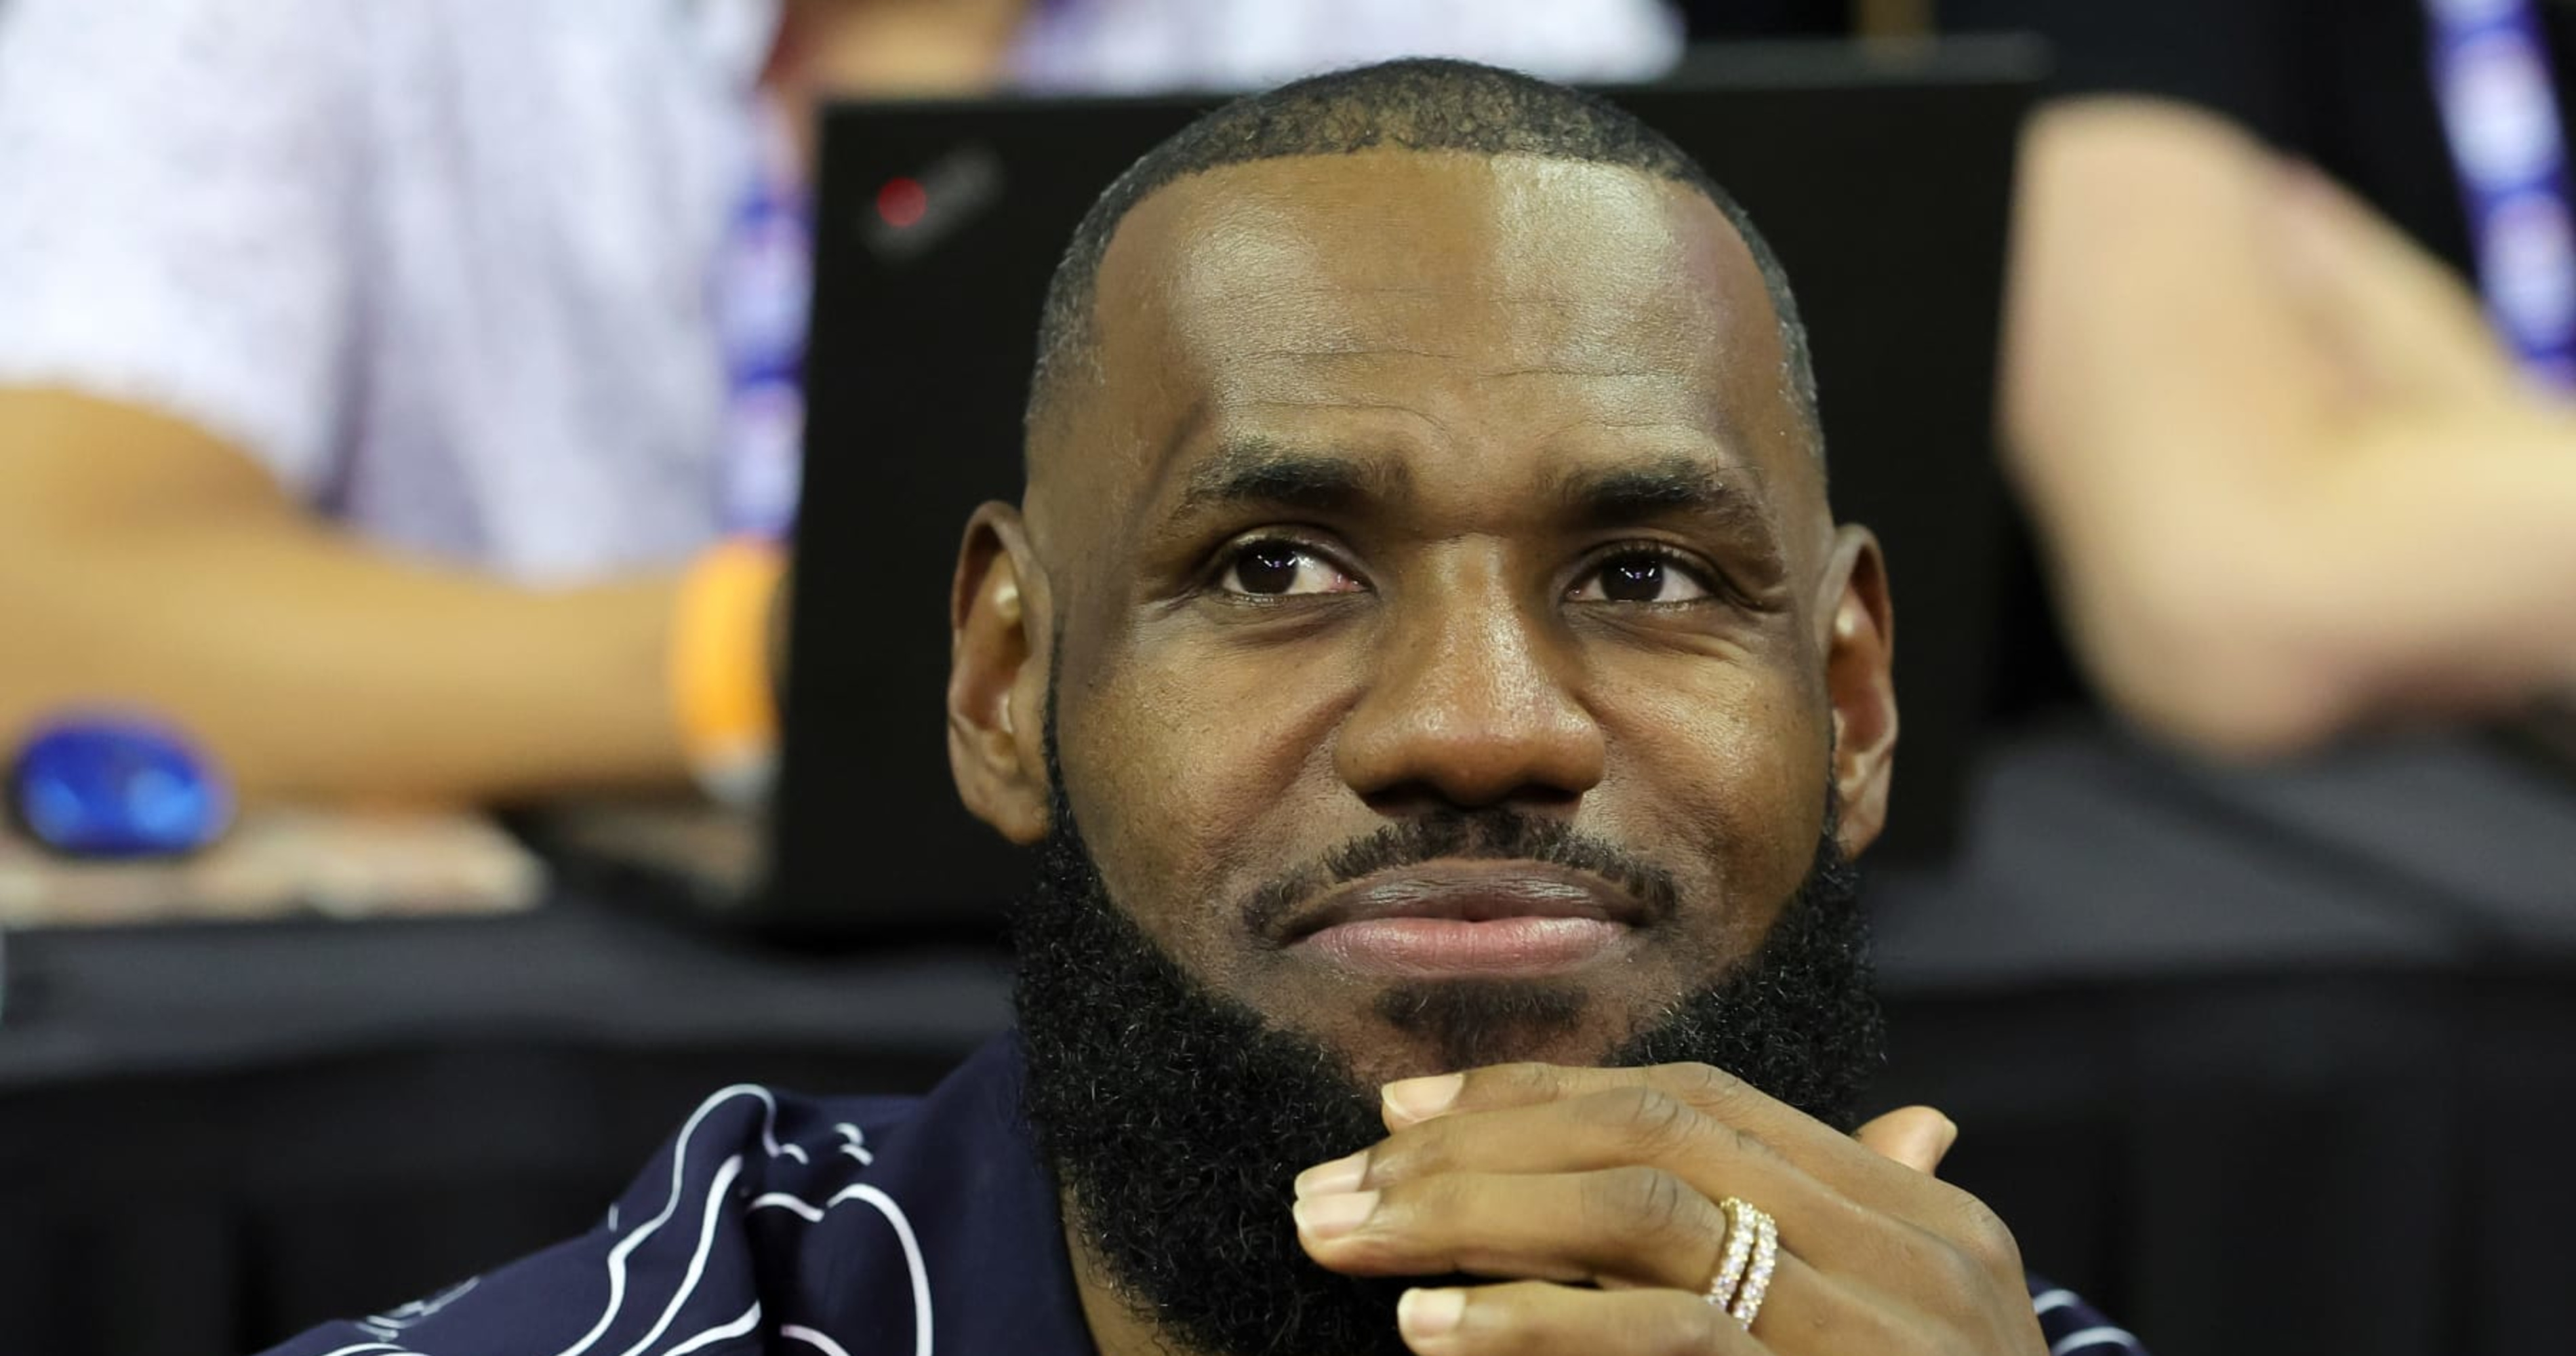 LeBron James, Lakers Had 'Productive' Contract Talks Thursday, Rich Paul Says